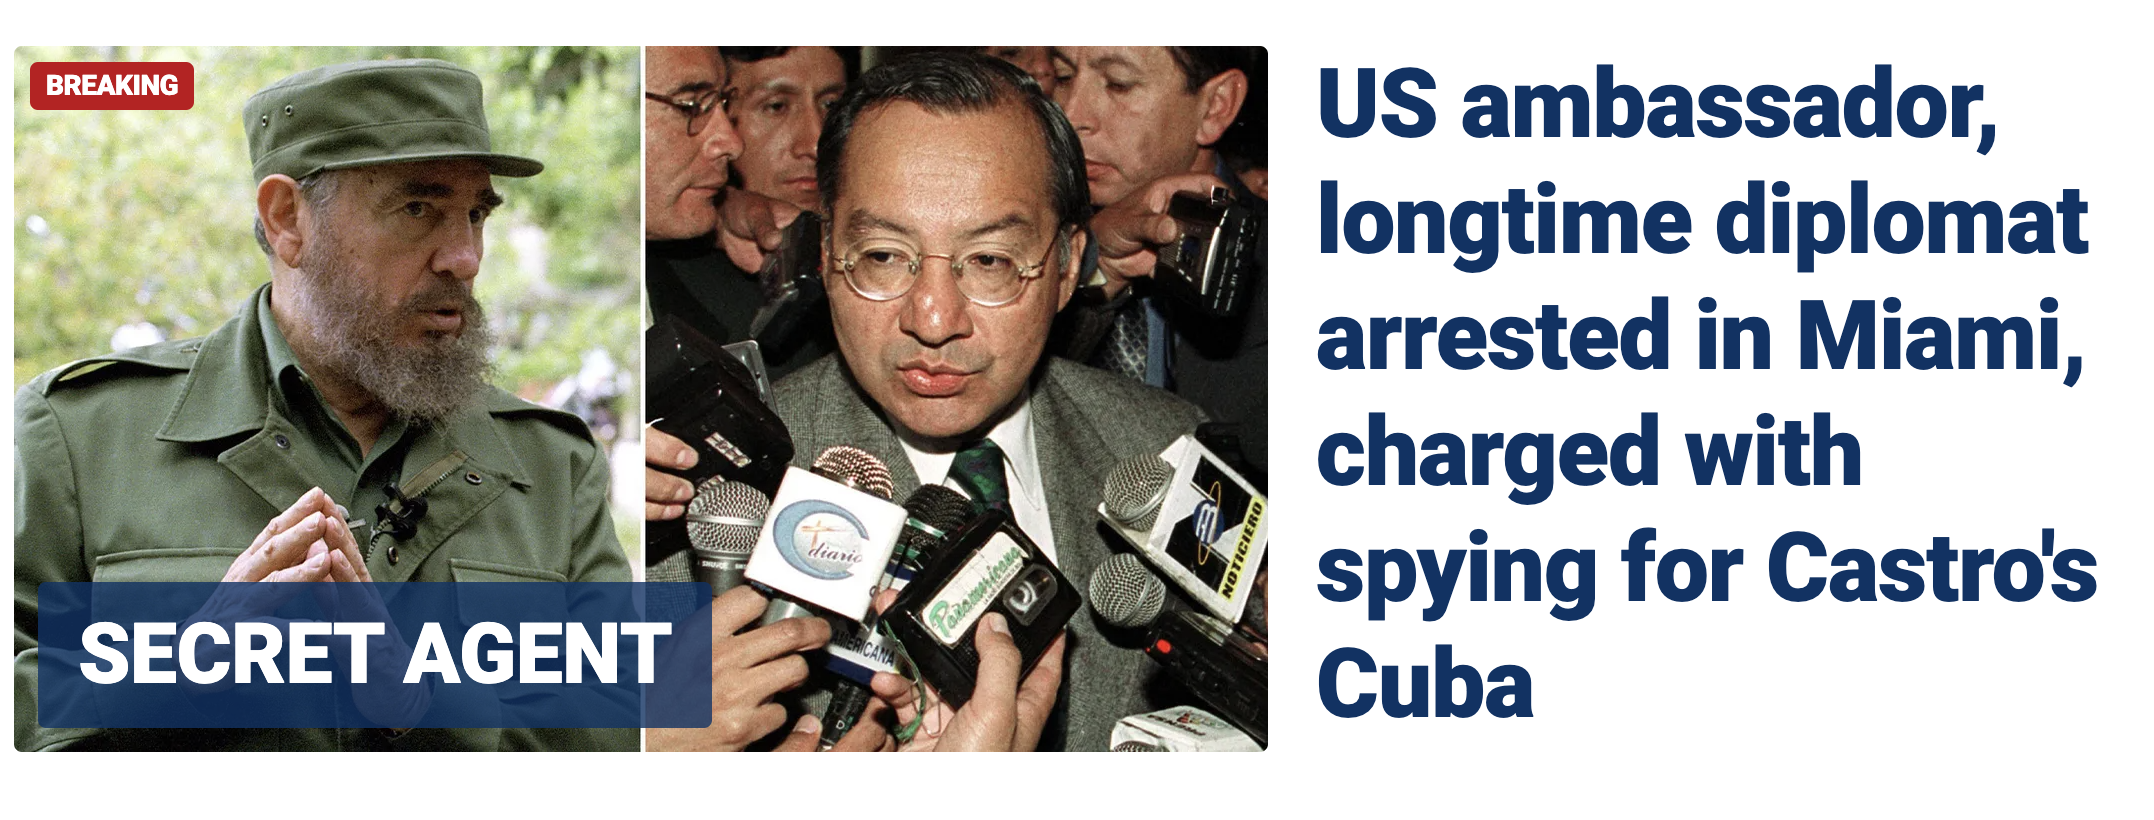 Former US ambassador arrested, accused of working for Cuba - National Zero